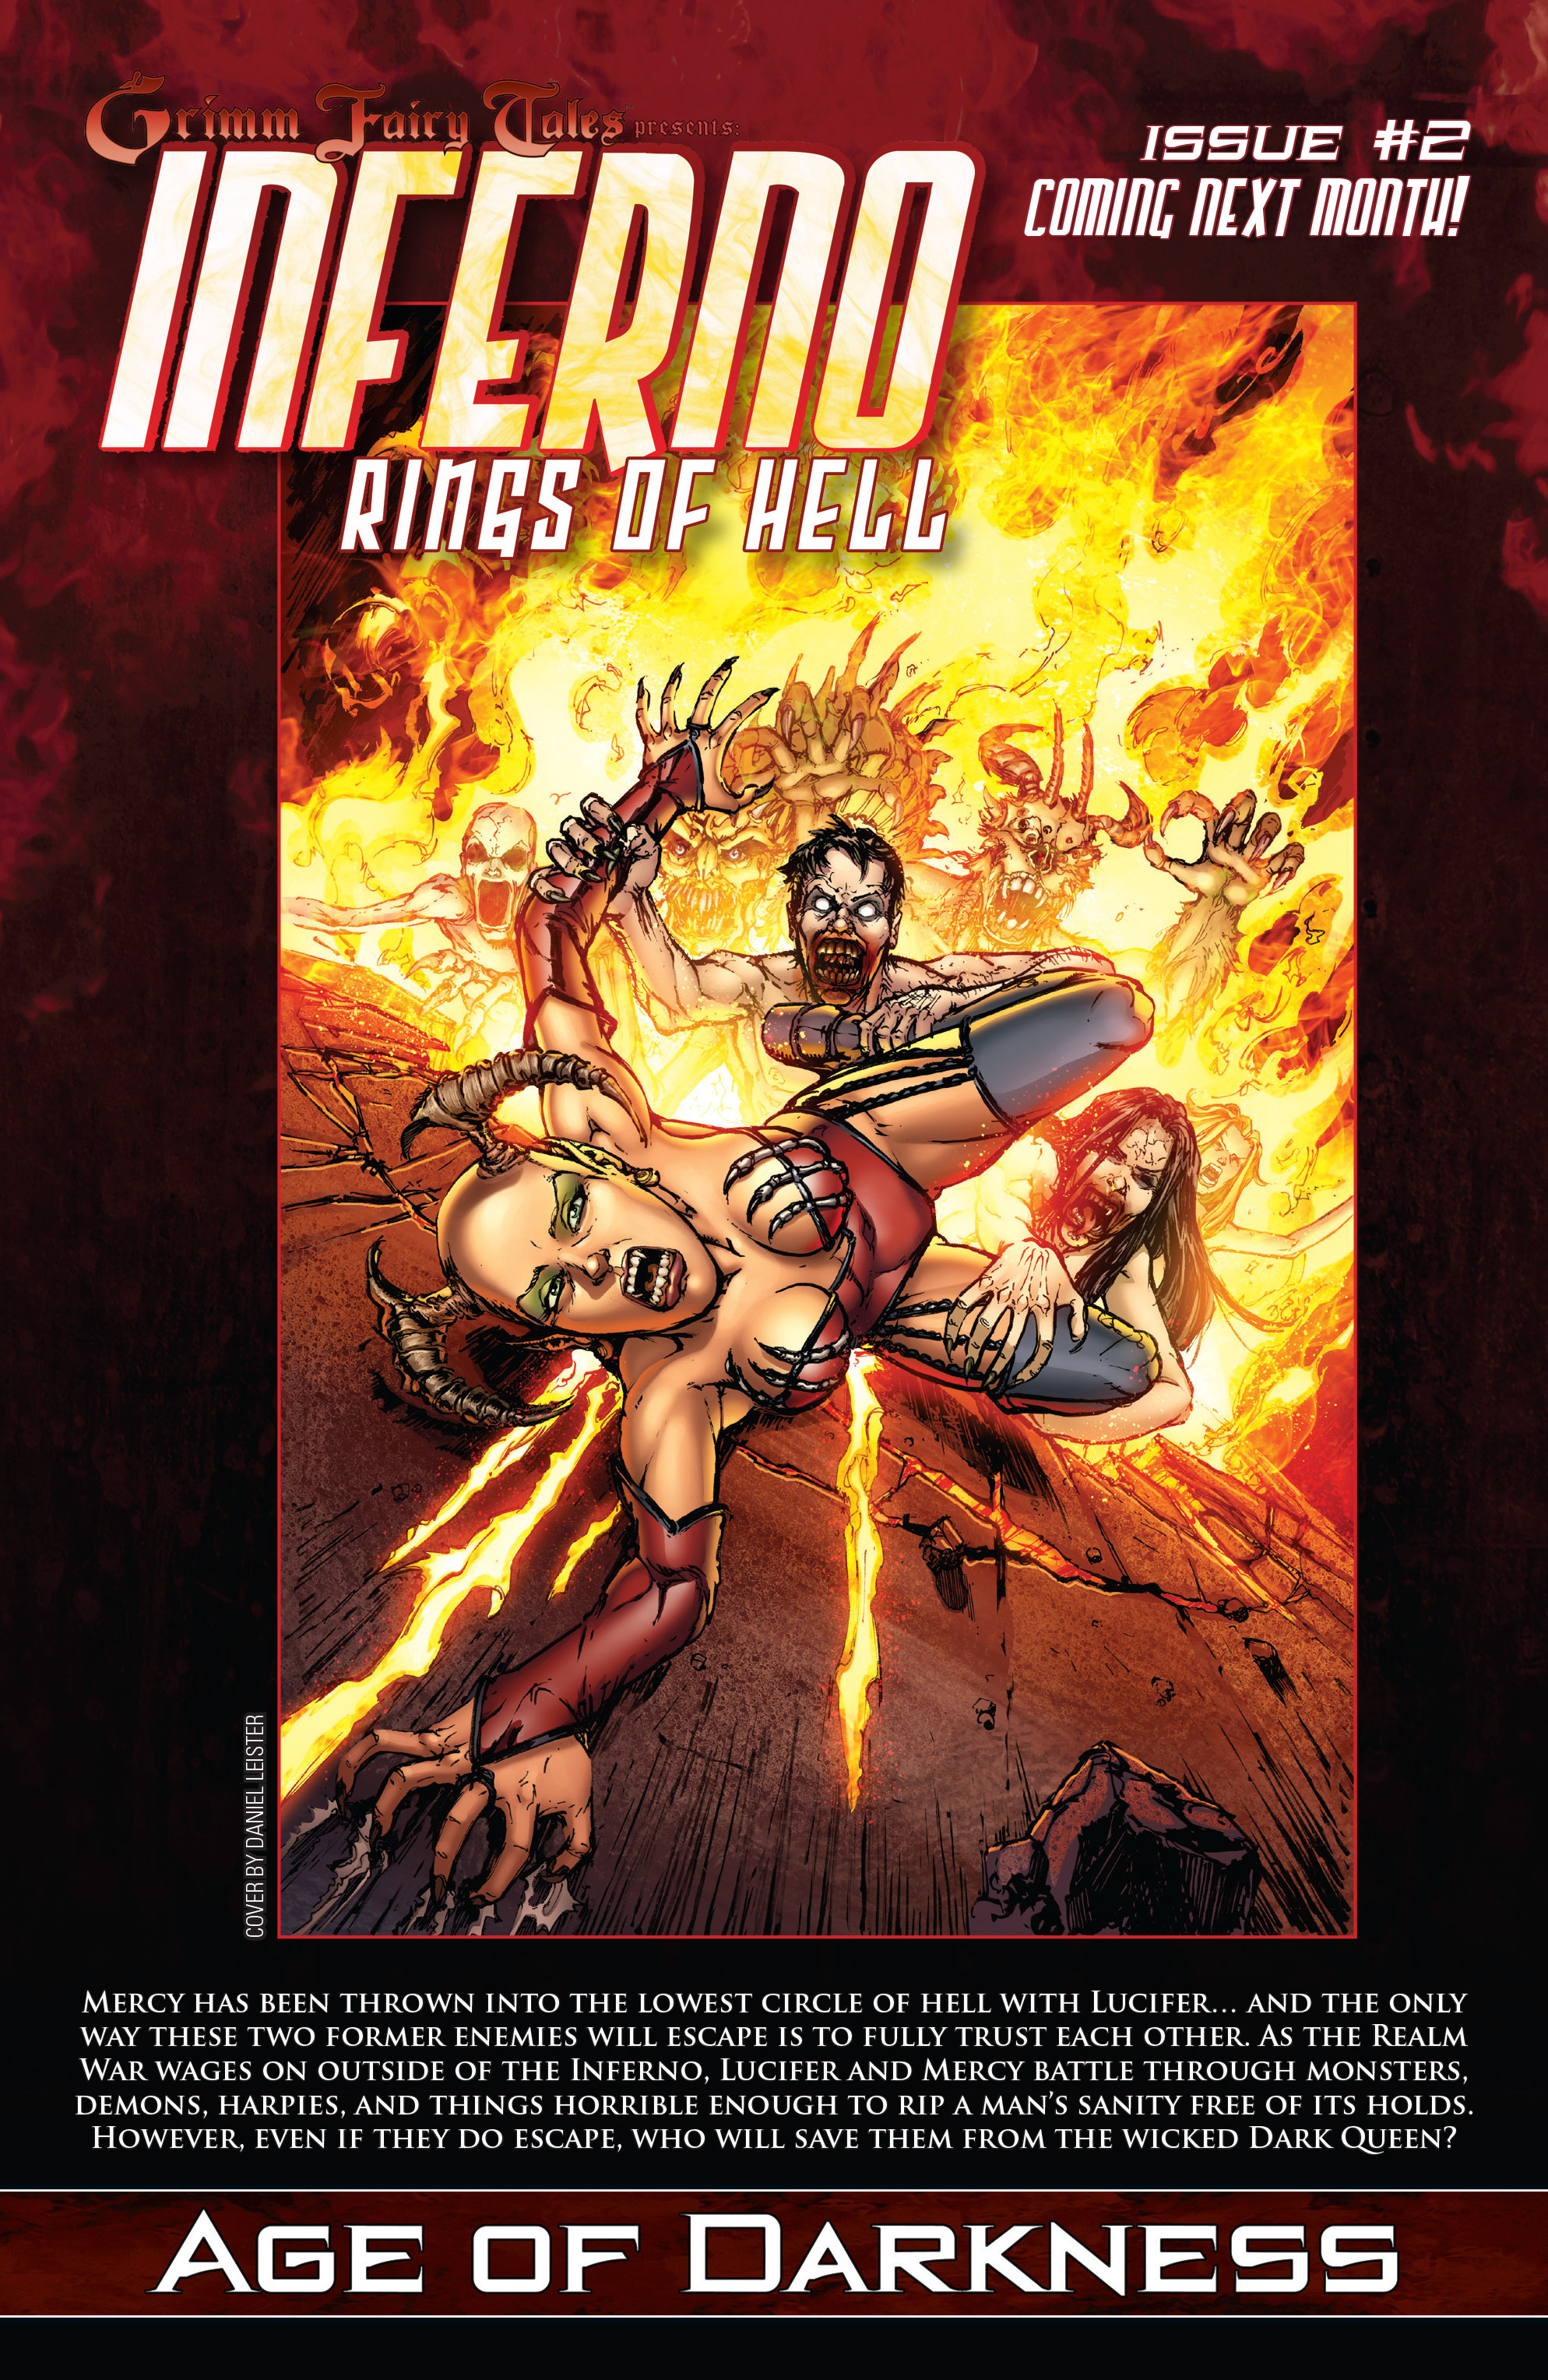 Read online Grimm Fairy Tales presents Inferno: Rings of Hell comic -  Issue #1 - 25